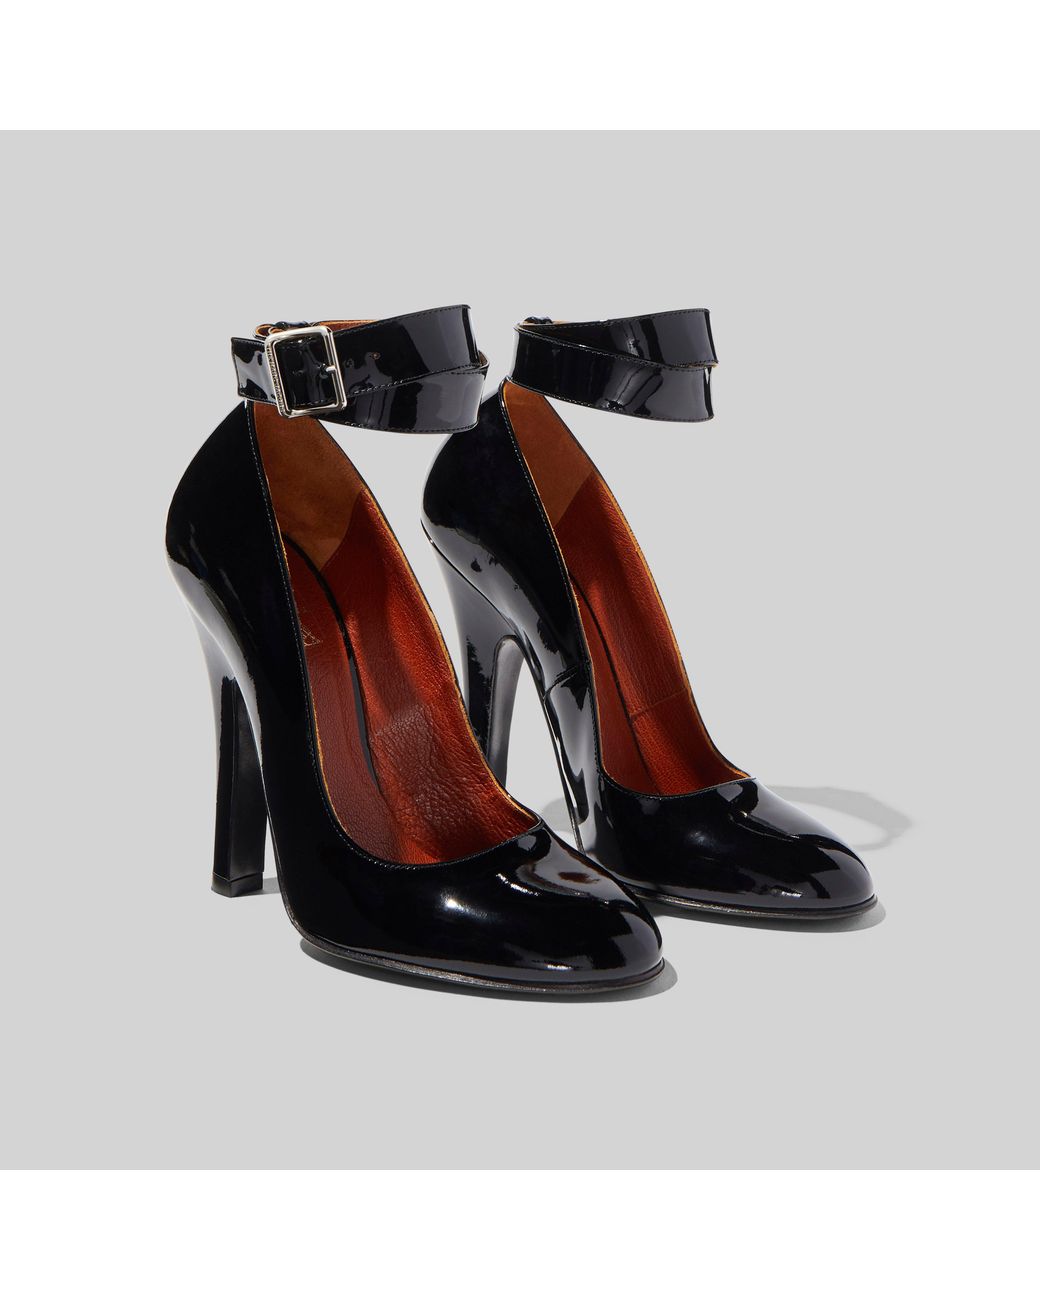 Marc Jacobs The Fetish Pumps Shoes in Black | Lyst